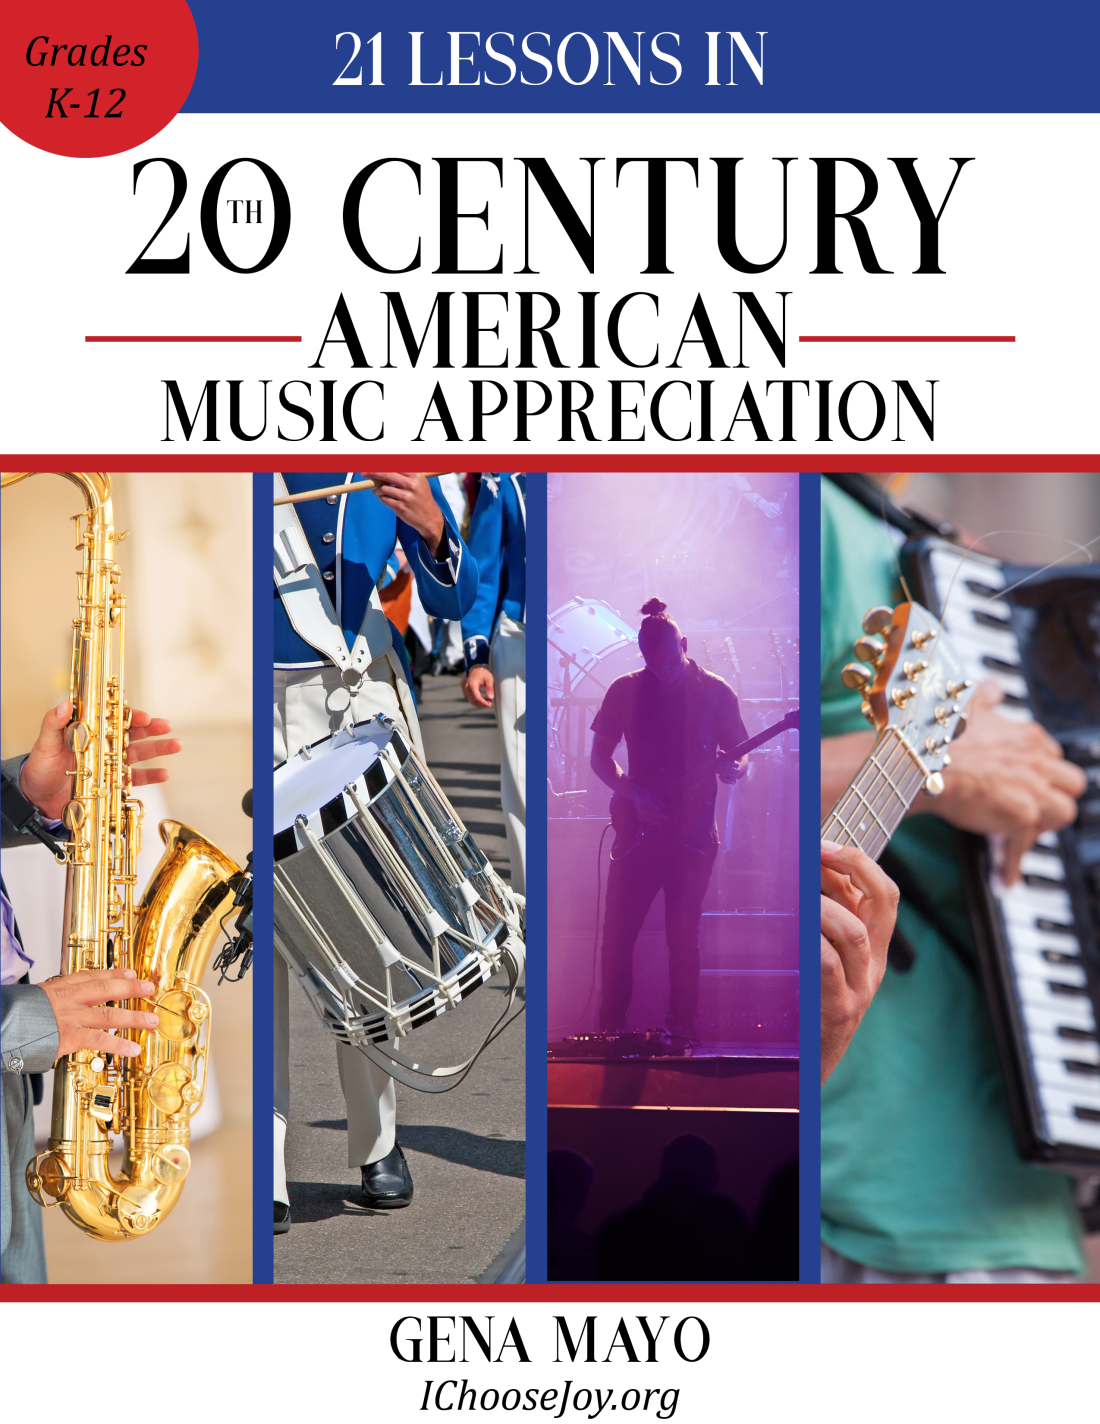 "21 Lessons in 20th Century American Music Appreciation" is a wonderful way to study American music for grades K-12th, can even be used for high school credit! #musicappreciation #musichistory #musiclessonsforkids #homeschoolmusic #musicinourhomeschool